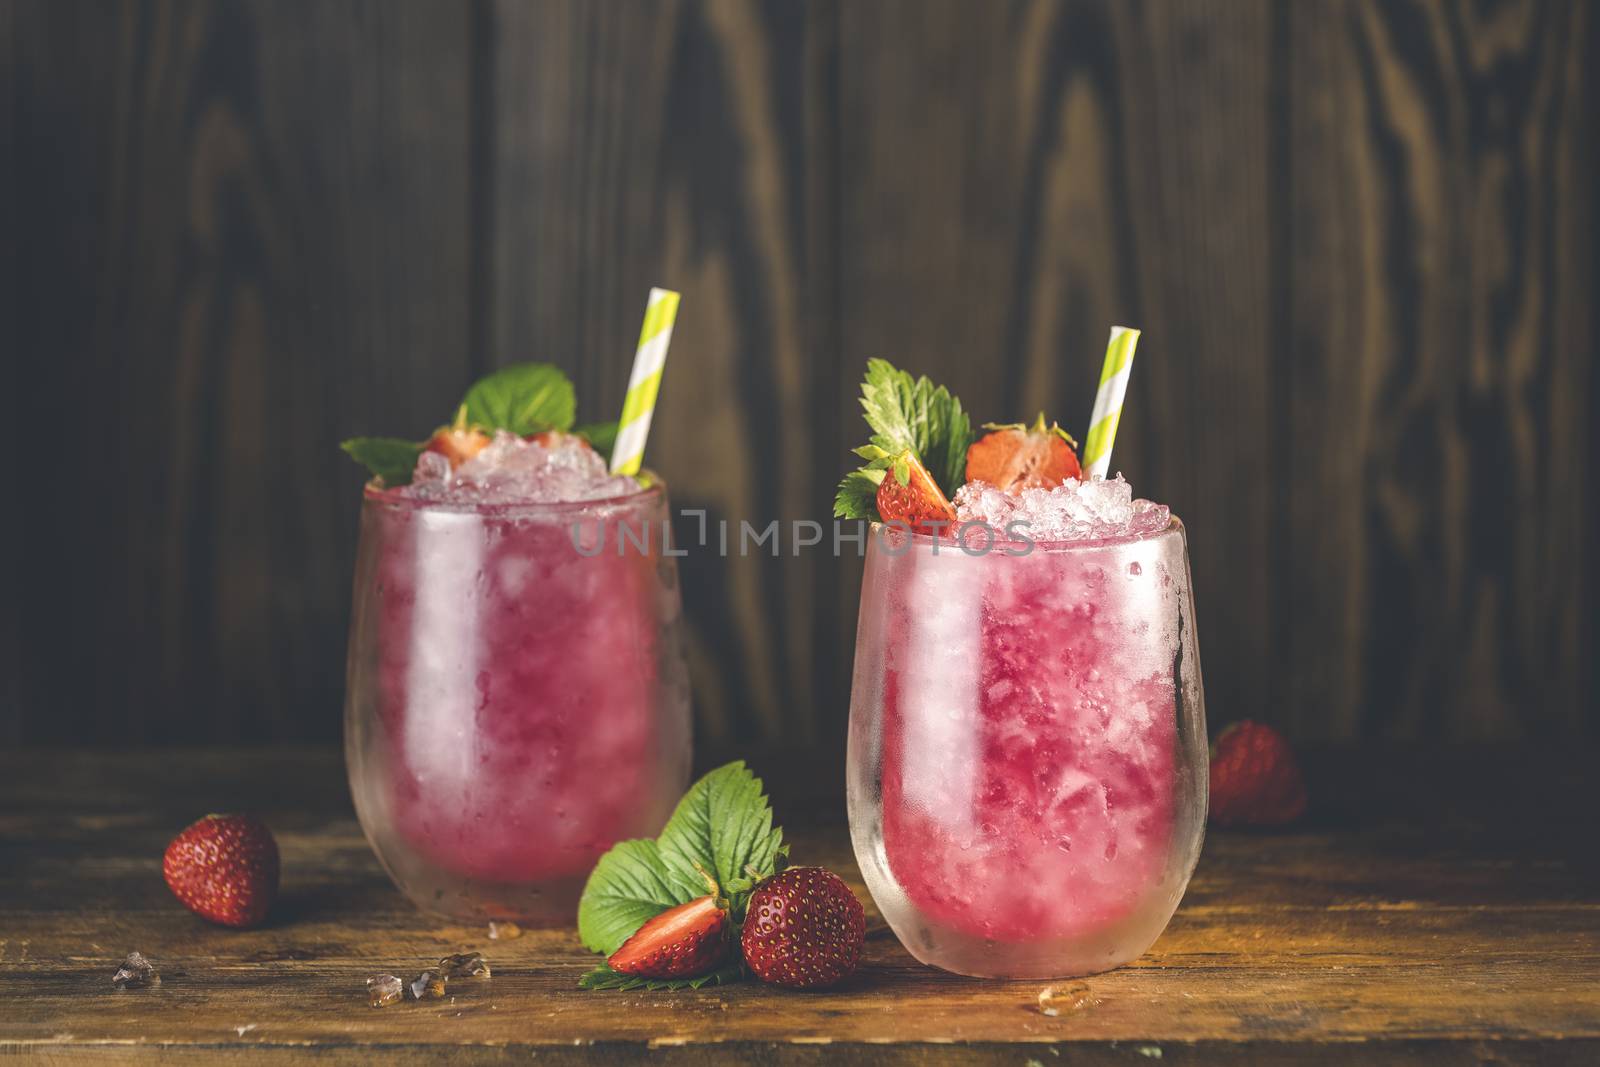 Strawberry drink with ice. Two glass of strawberry ice drink with ripe berry on wooden turquoise table surface. Alcoholic nonalcoholic summer fresh drink beverage	